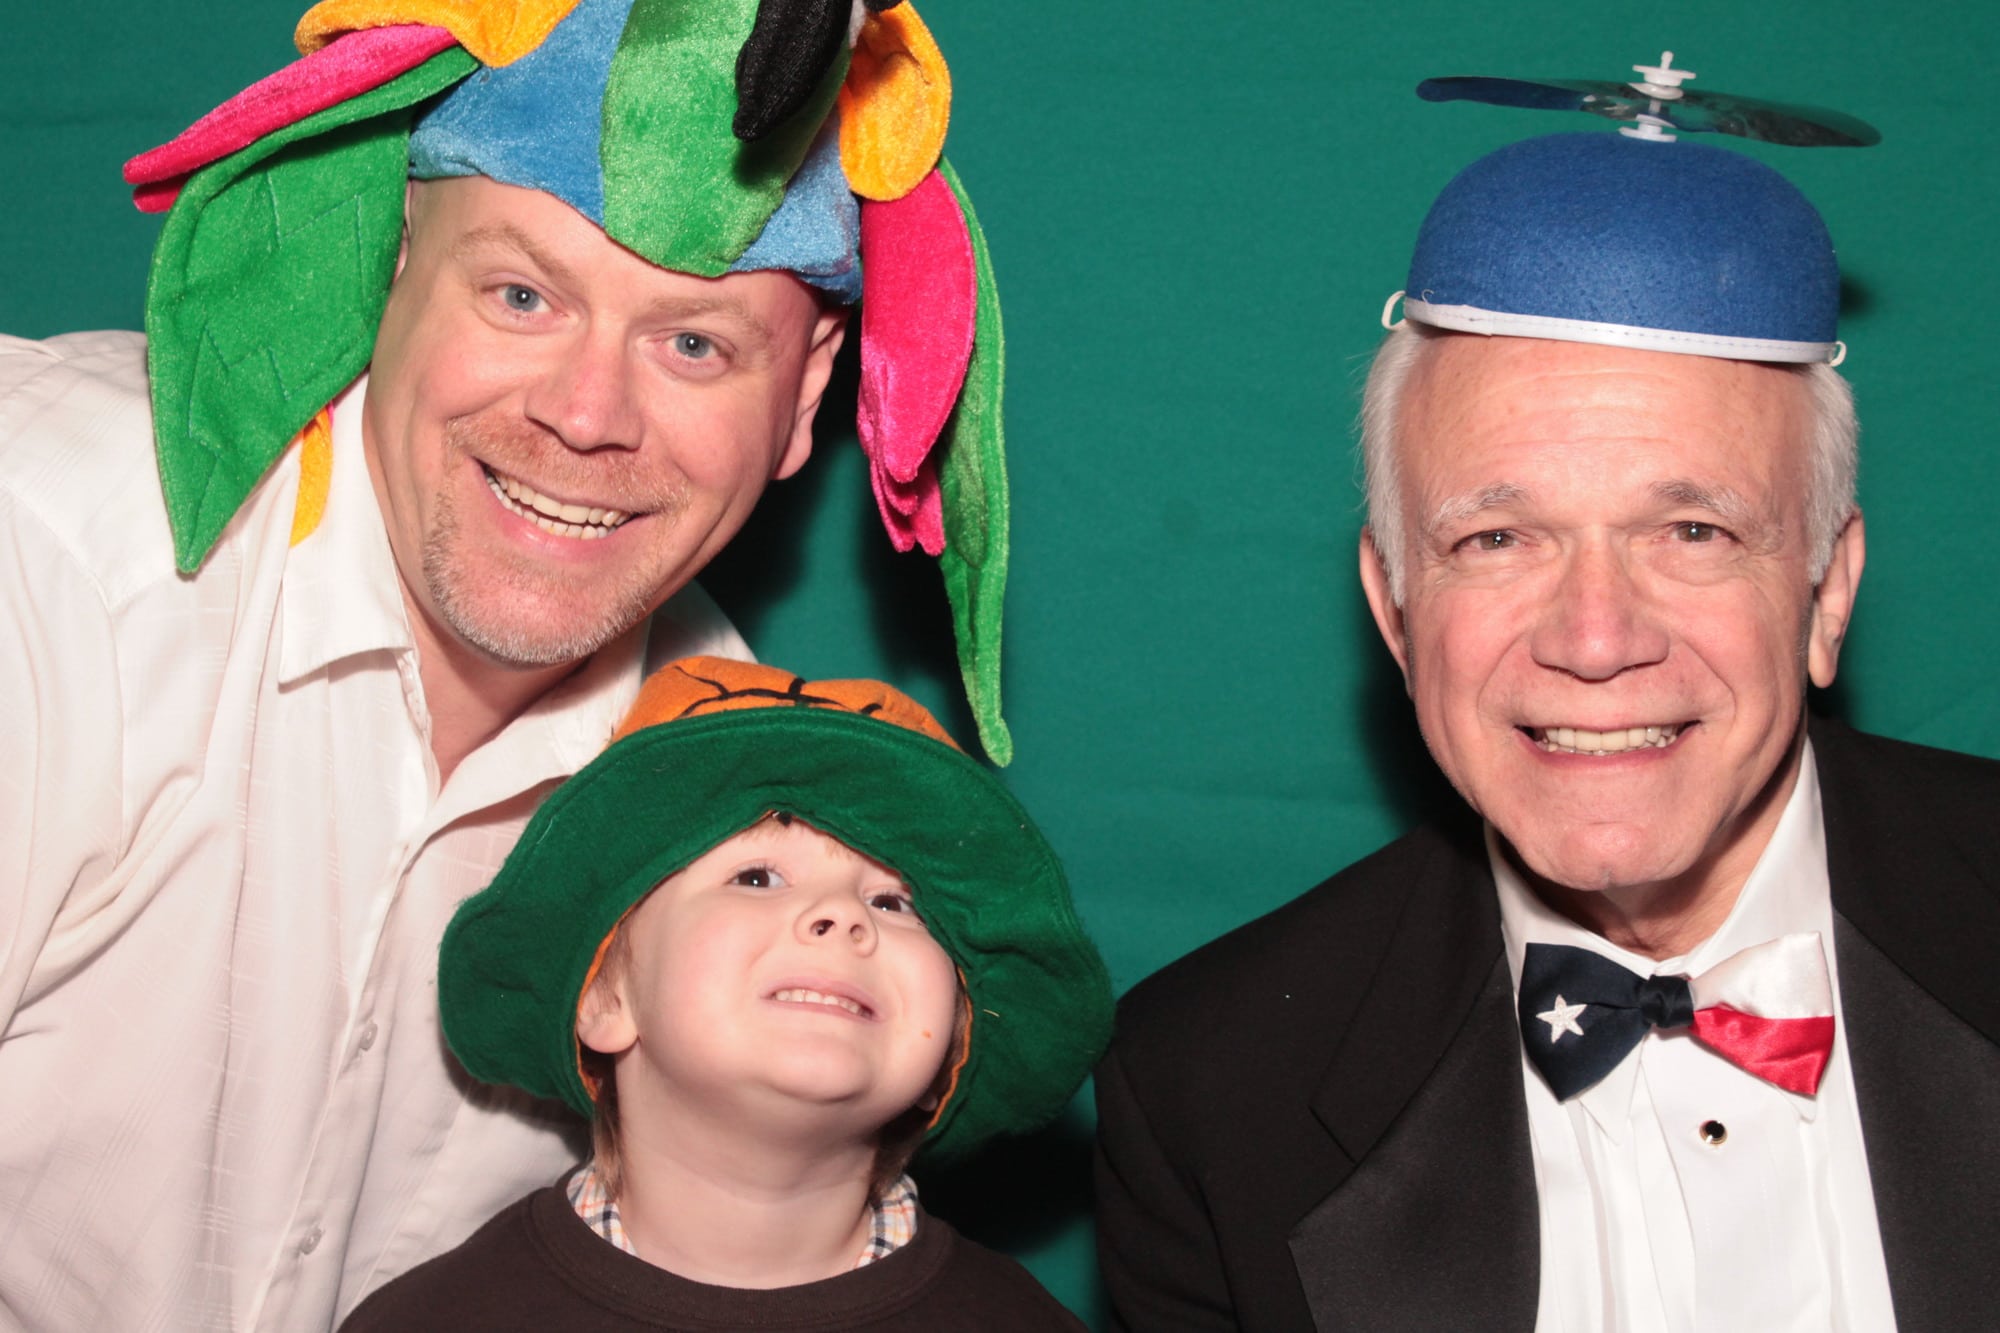 Photo Booth Rental-Wedding-Images-Fun-Children-Props-Close Up-Best-Outstanding